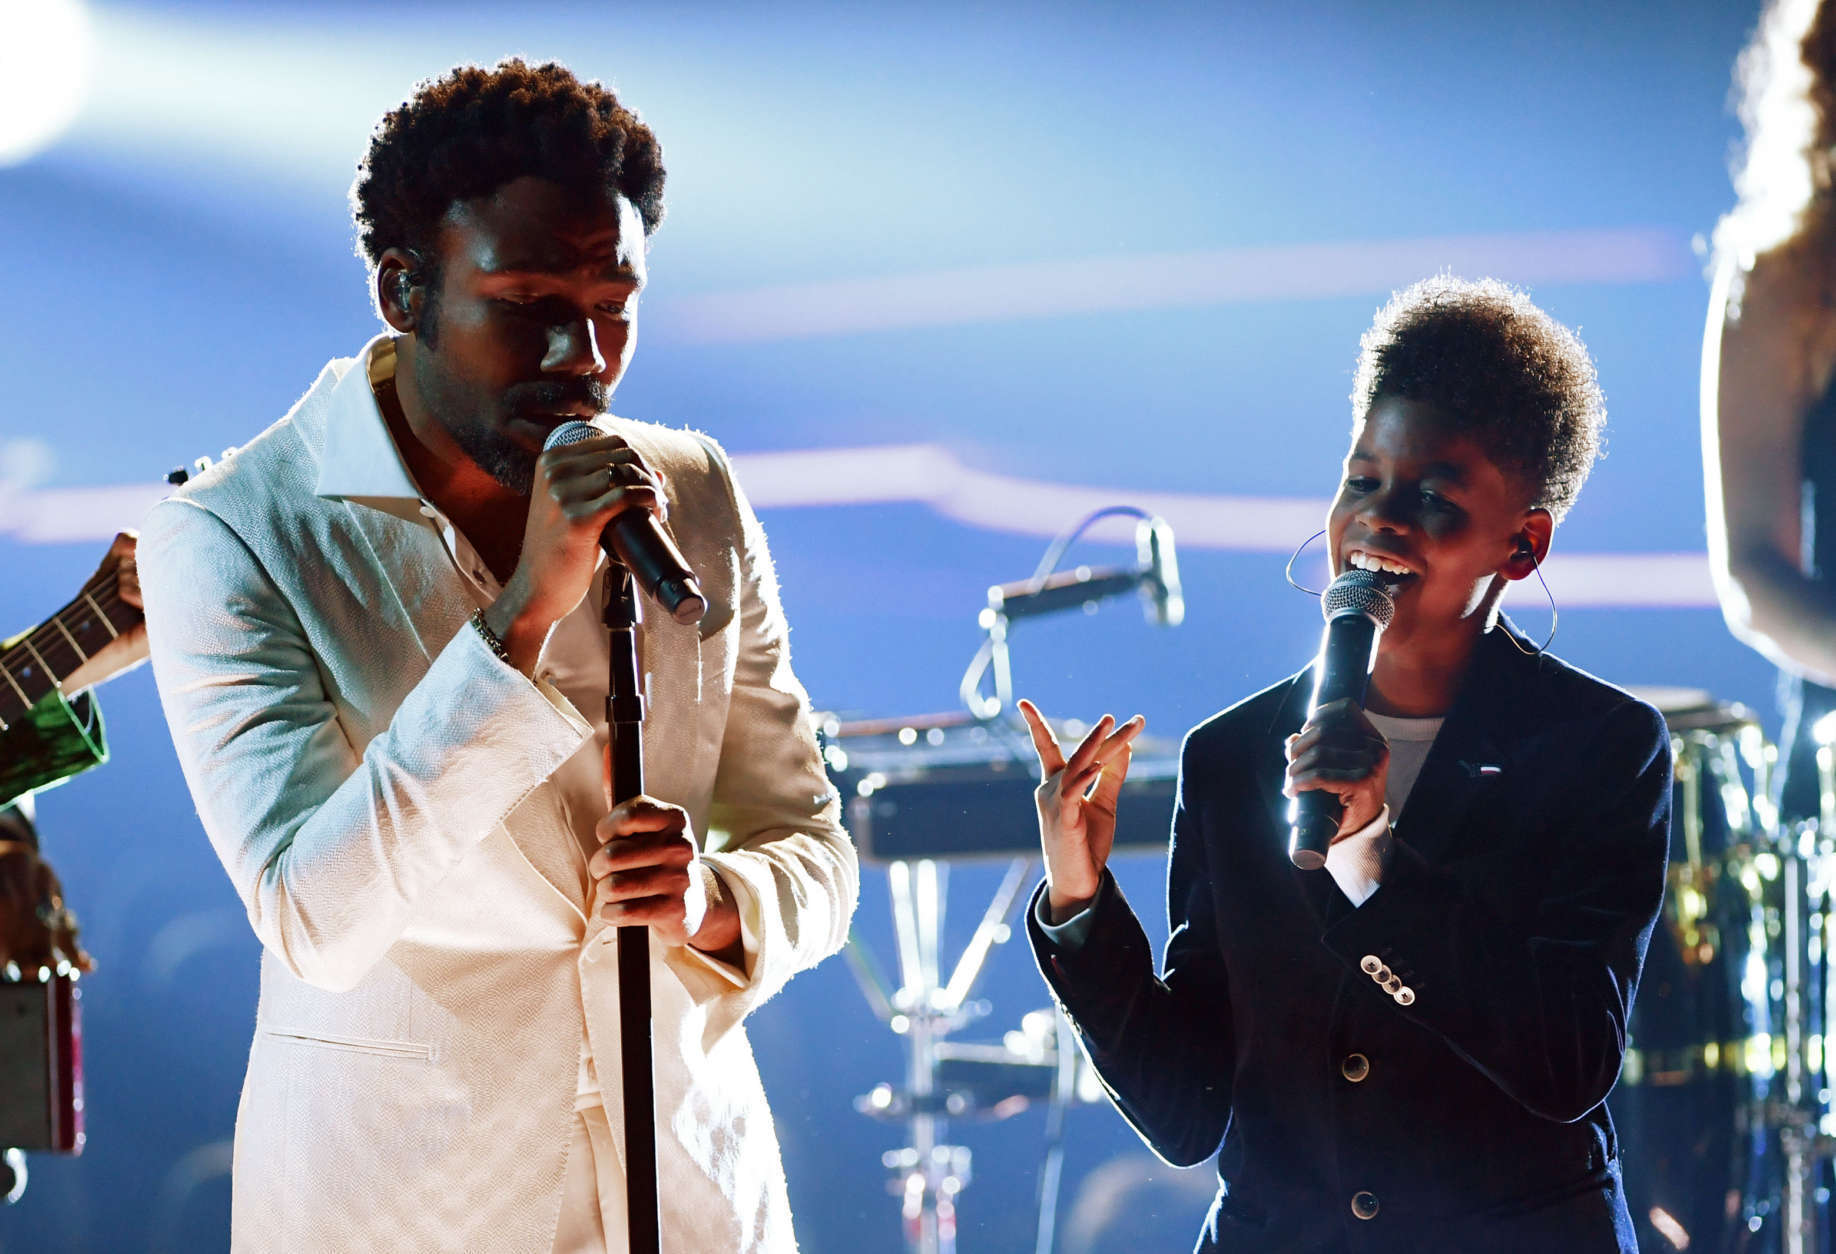 NEW YORK, NY - JANUARY 28:  Recording artists Childish Gambino (L) and JD McCrary perform onstage during the 60th Annual GRAMMY Awards at Madison Square Garden on January 28, 2018 in New York City.  (Photo by Kevin Winter/Getty Images for NARAS)